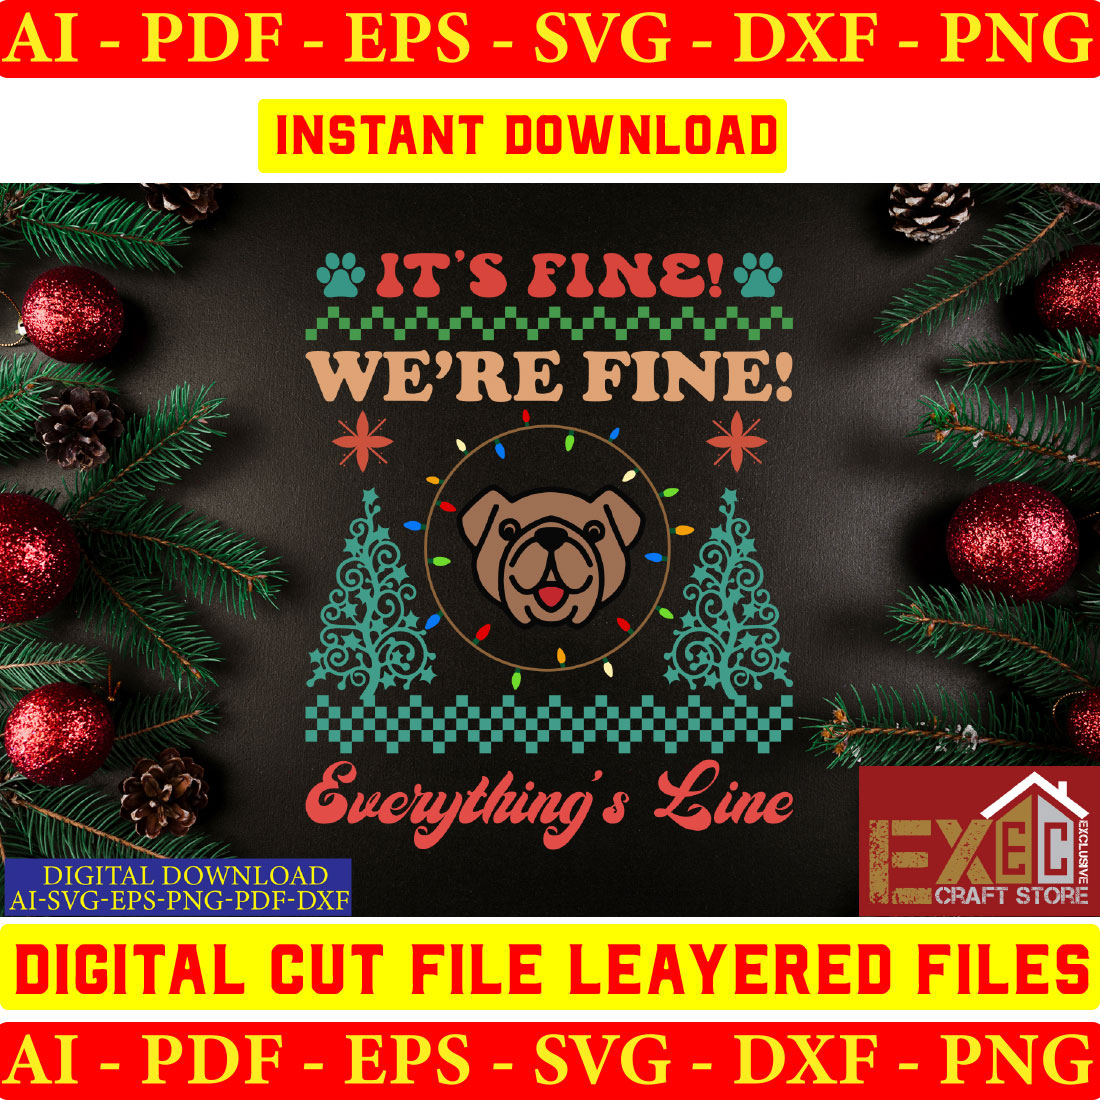 It's fine we're fine everything's fine digital cut file layered.